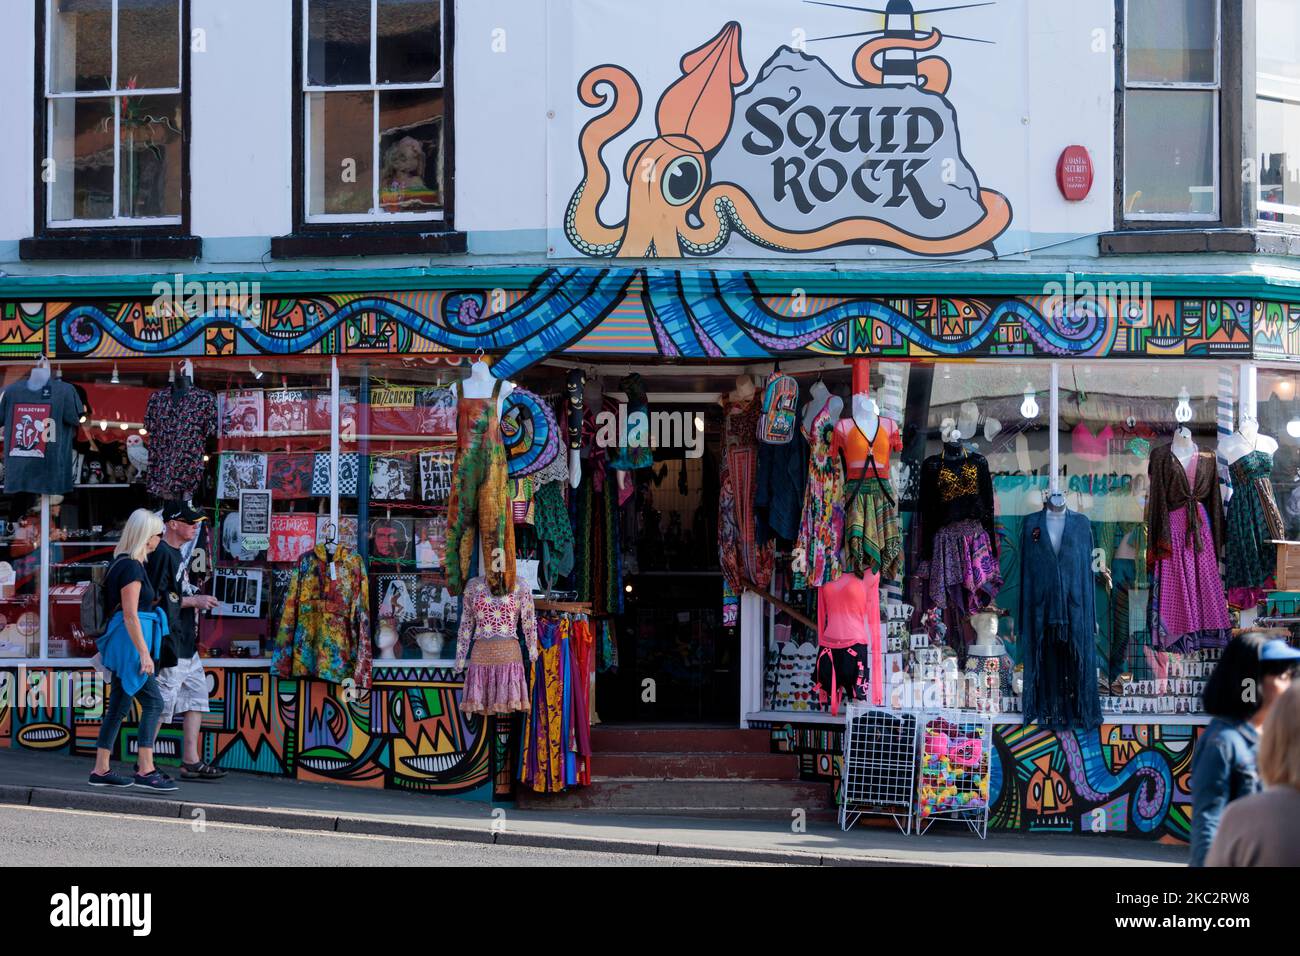 Squid Rock Shop Whitby North Yorkshire England Stock Photo